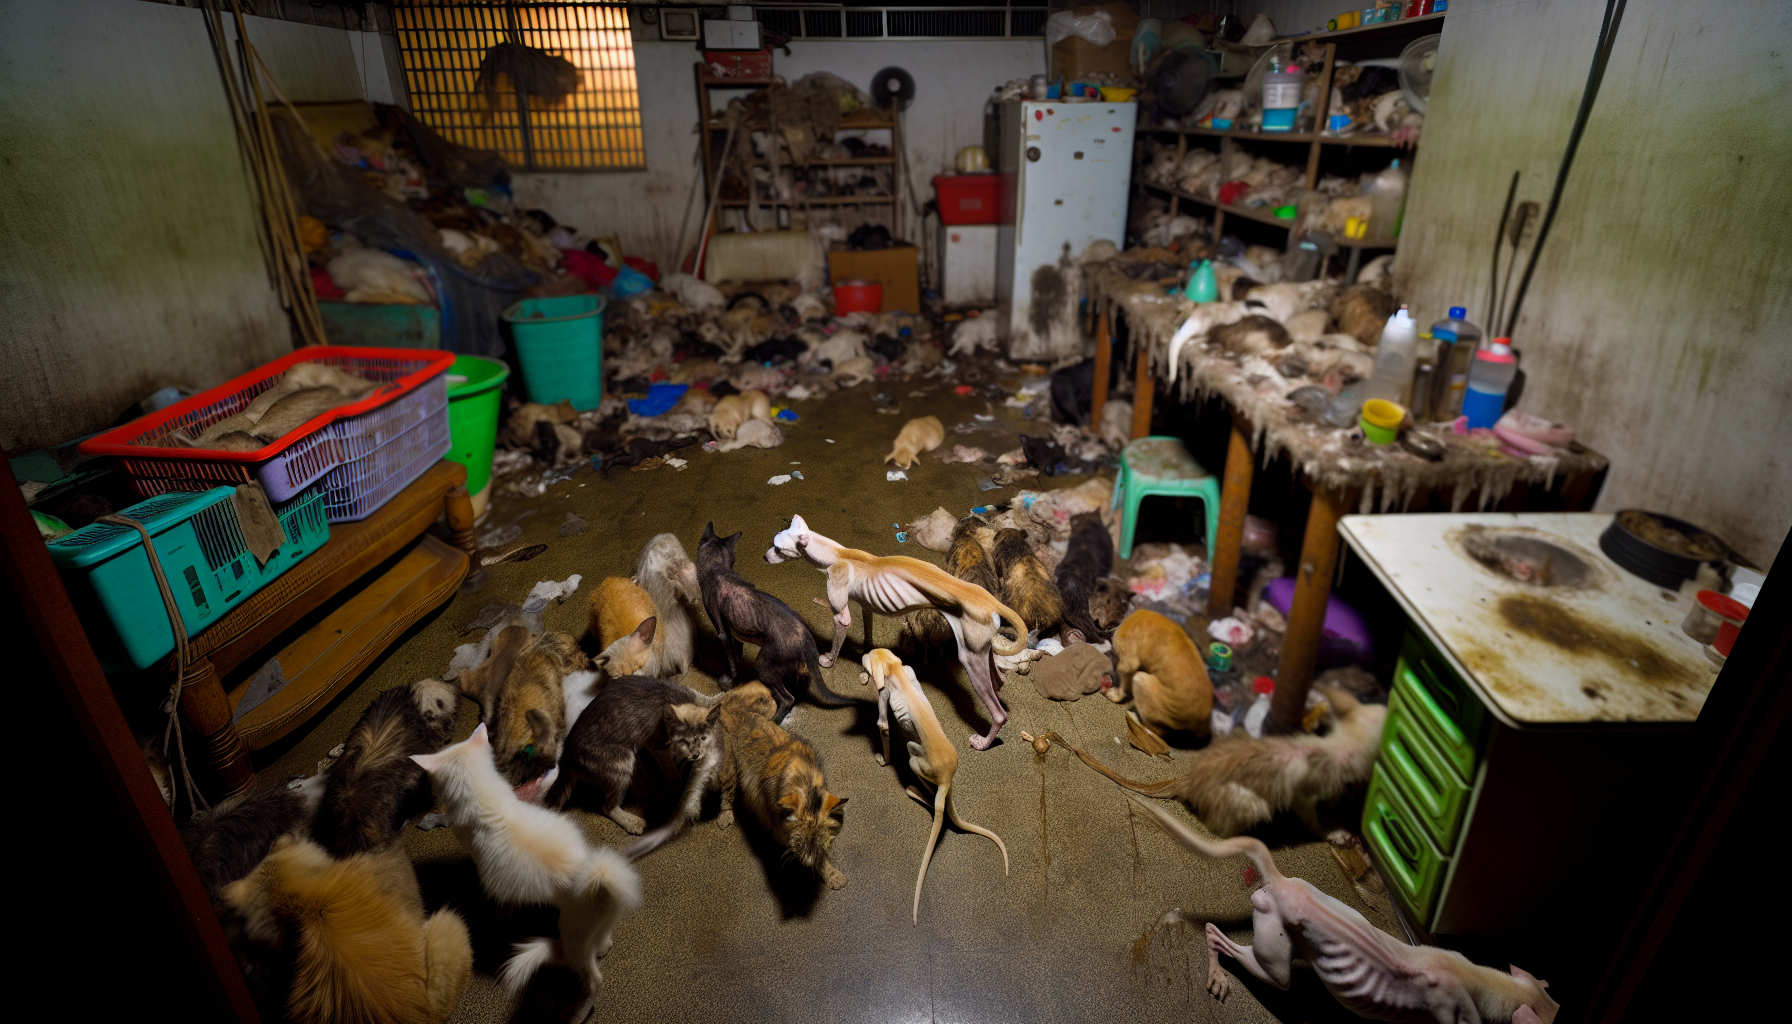 Photo of unsanitary living conditions due to animal hoarding